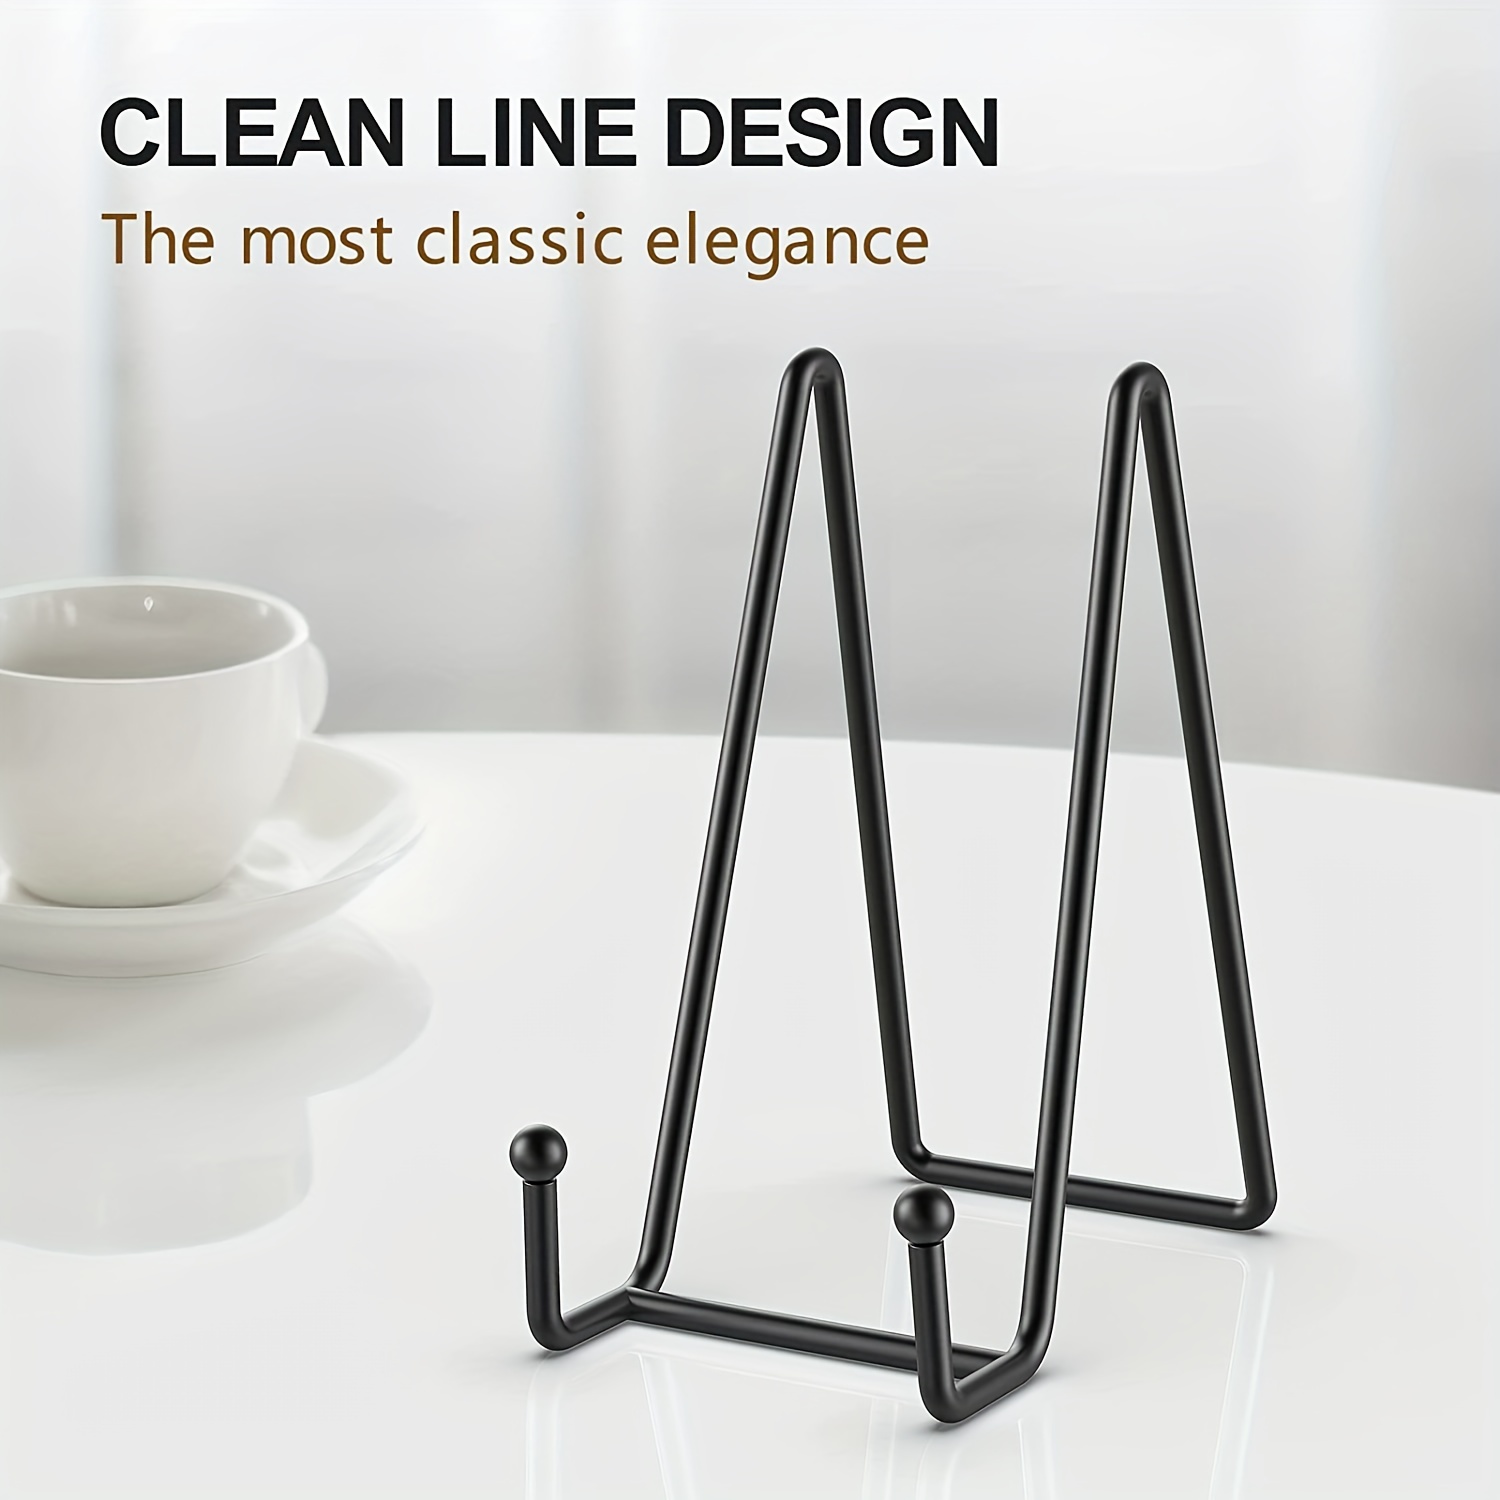 Metal Frame Holders,Plate Stands for Display Picture Stand-Metal Table Top Display,Metal Frame Holders Decorative Plate for Book,Picture,Photo and